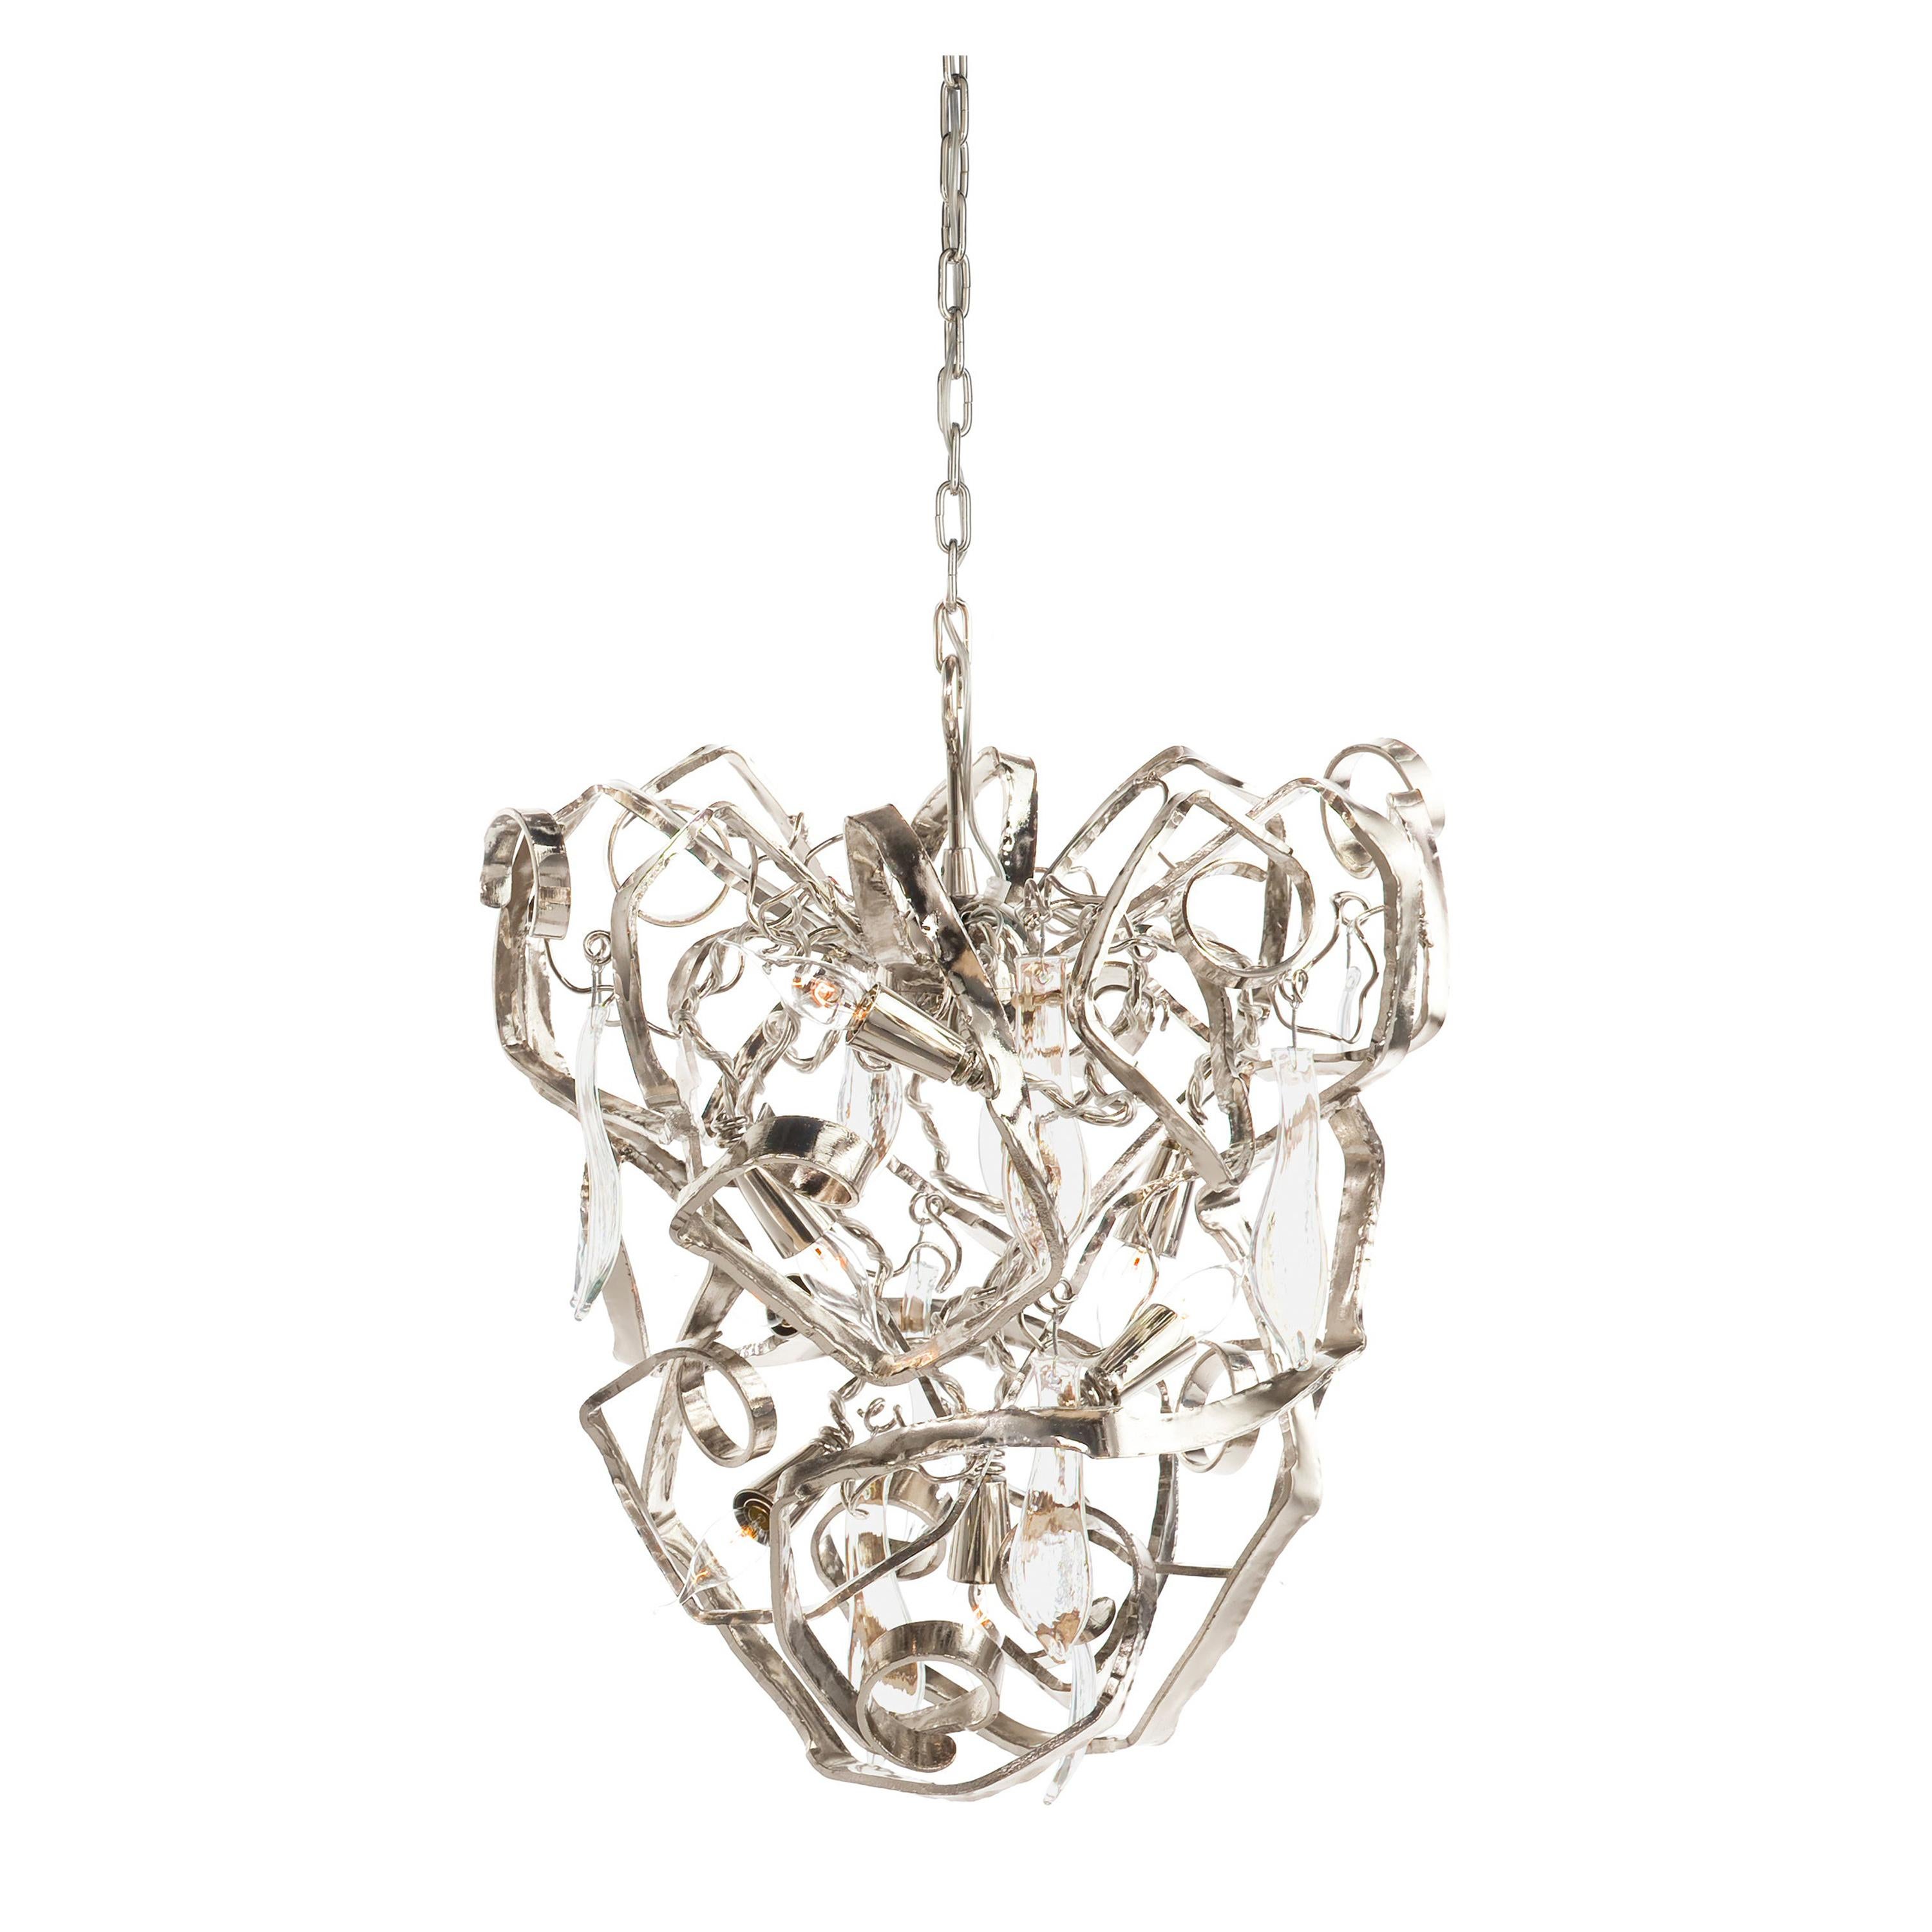 Modern Chandelier in a Conical Shape and in a Nickel Finish, Delphinium For Sale